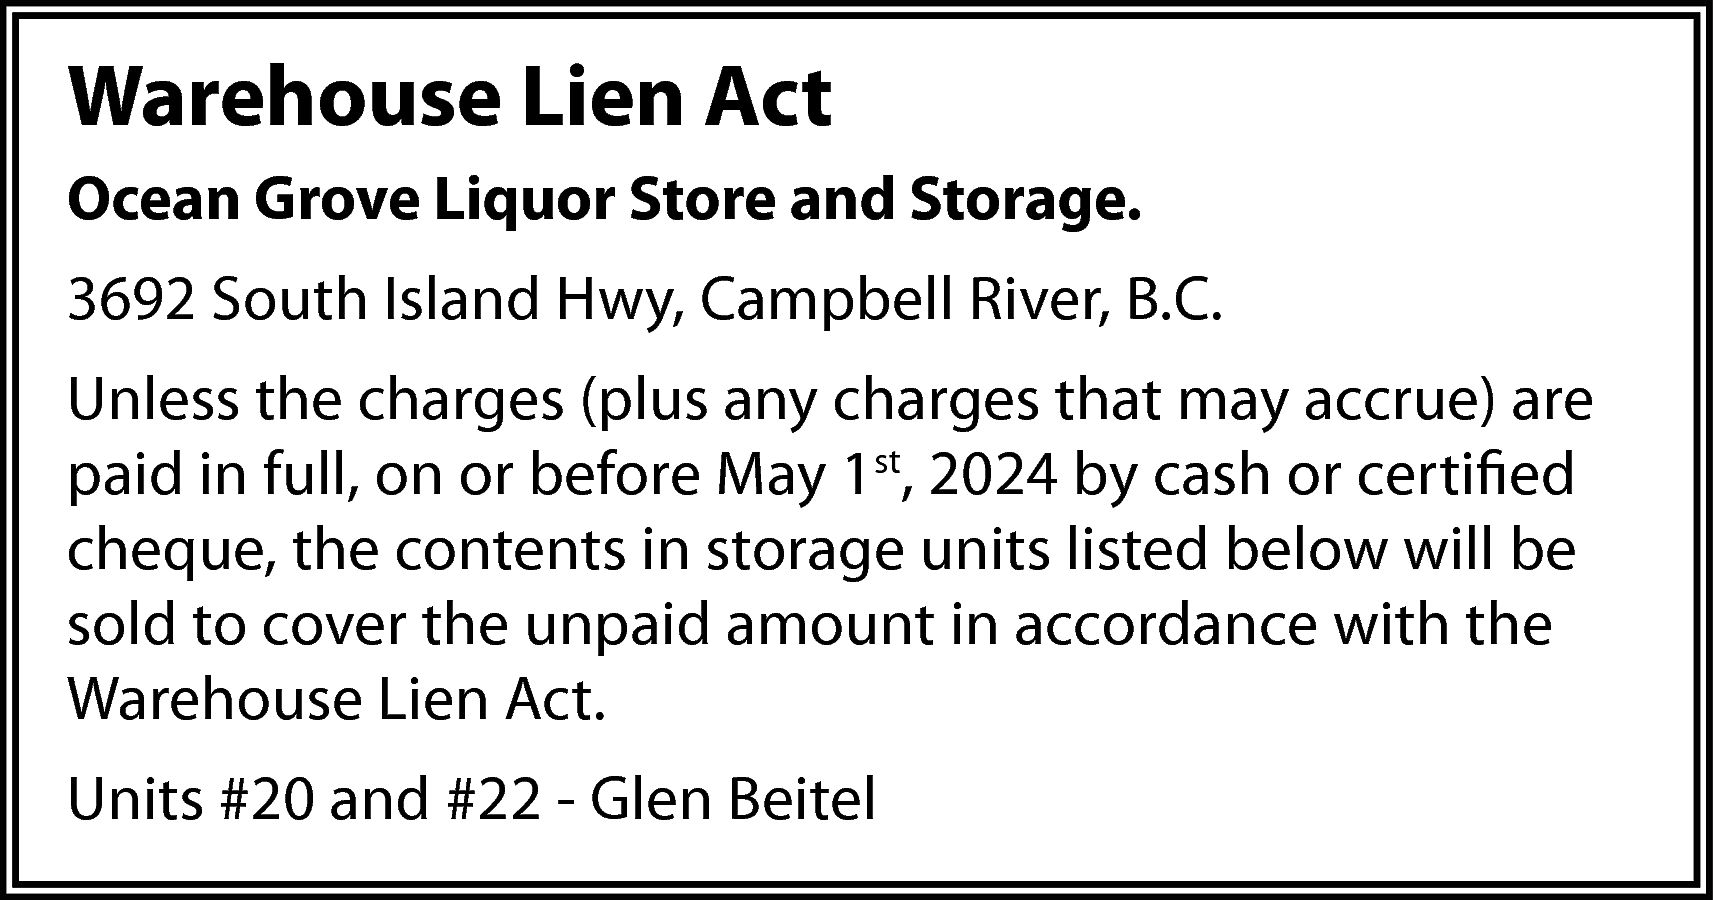 Warehouse Lien Act <br>Ocean Grove  Warehouse Lien Act  Ocean Grove Liquor Store and Storage.  3692 South Island Hwy, Campbell River, B.C.  Unless the charges (plus any charges that may accrue) are  paid in full, on or before May 1st, 2024 by cash or certified  cheque, the contents in storage units listed below will be  sold to cover the unpaid amount in accordance with the  Warehouse Lien Act.  Units #20 and #22 - Glen Beitel    